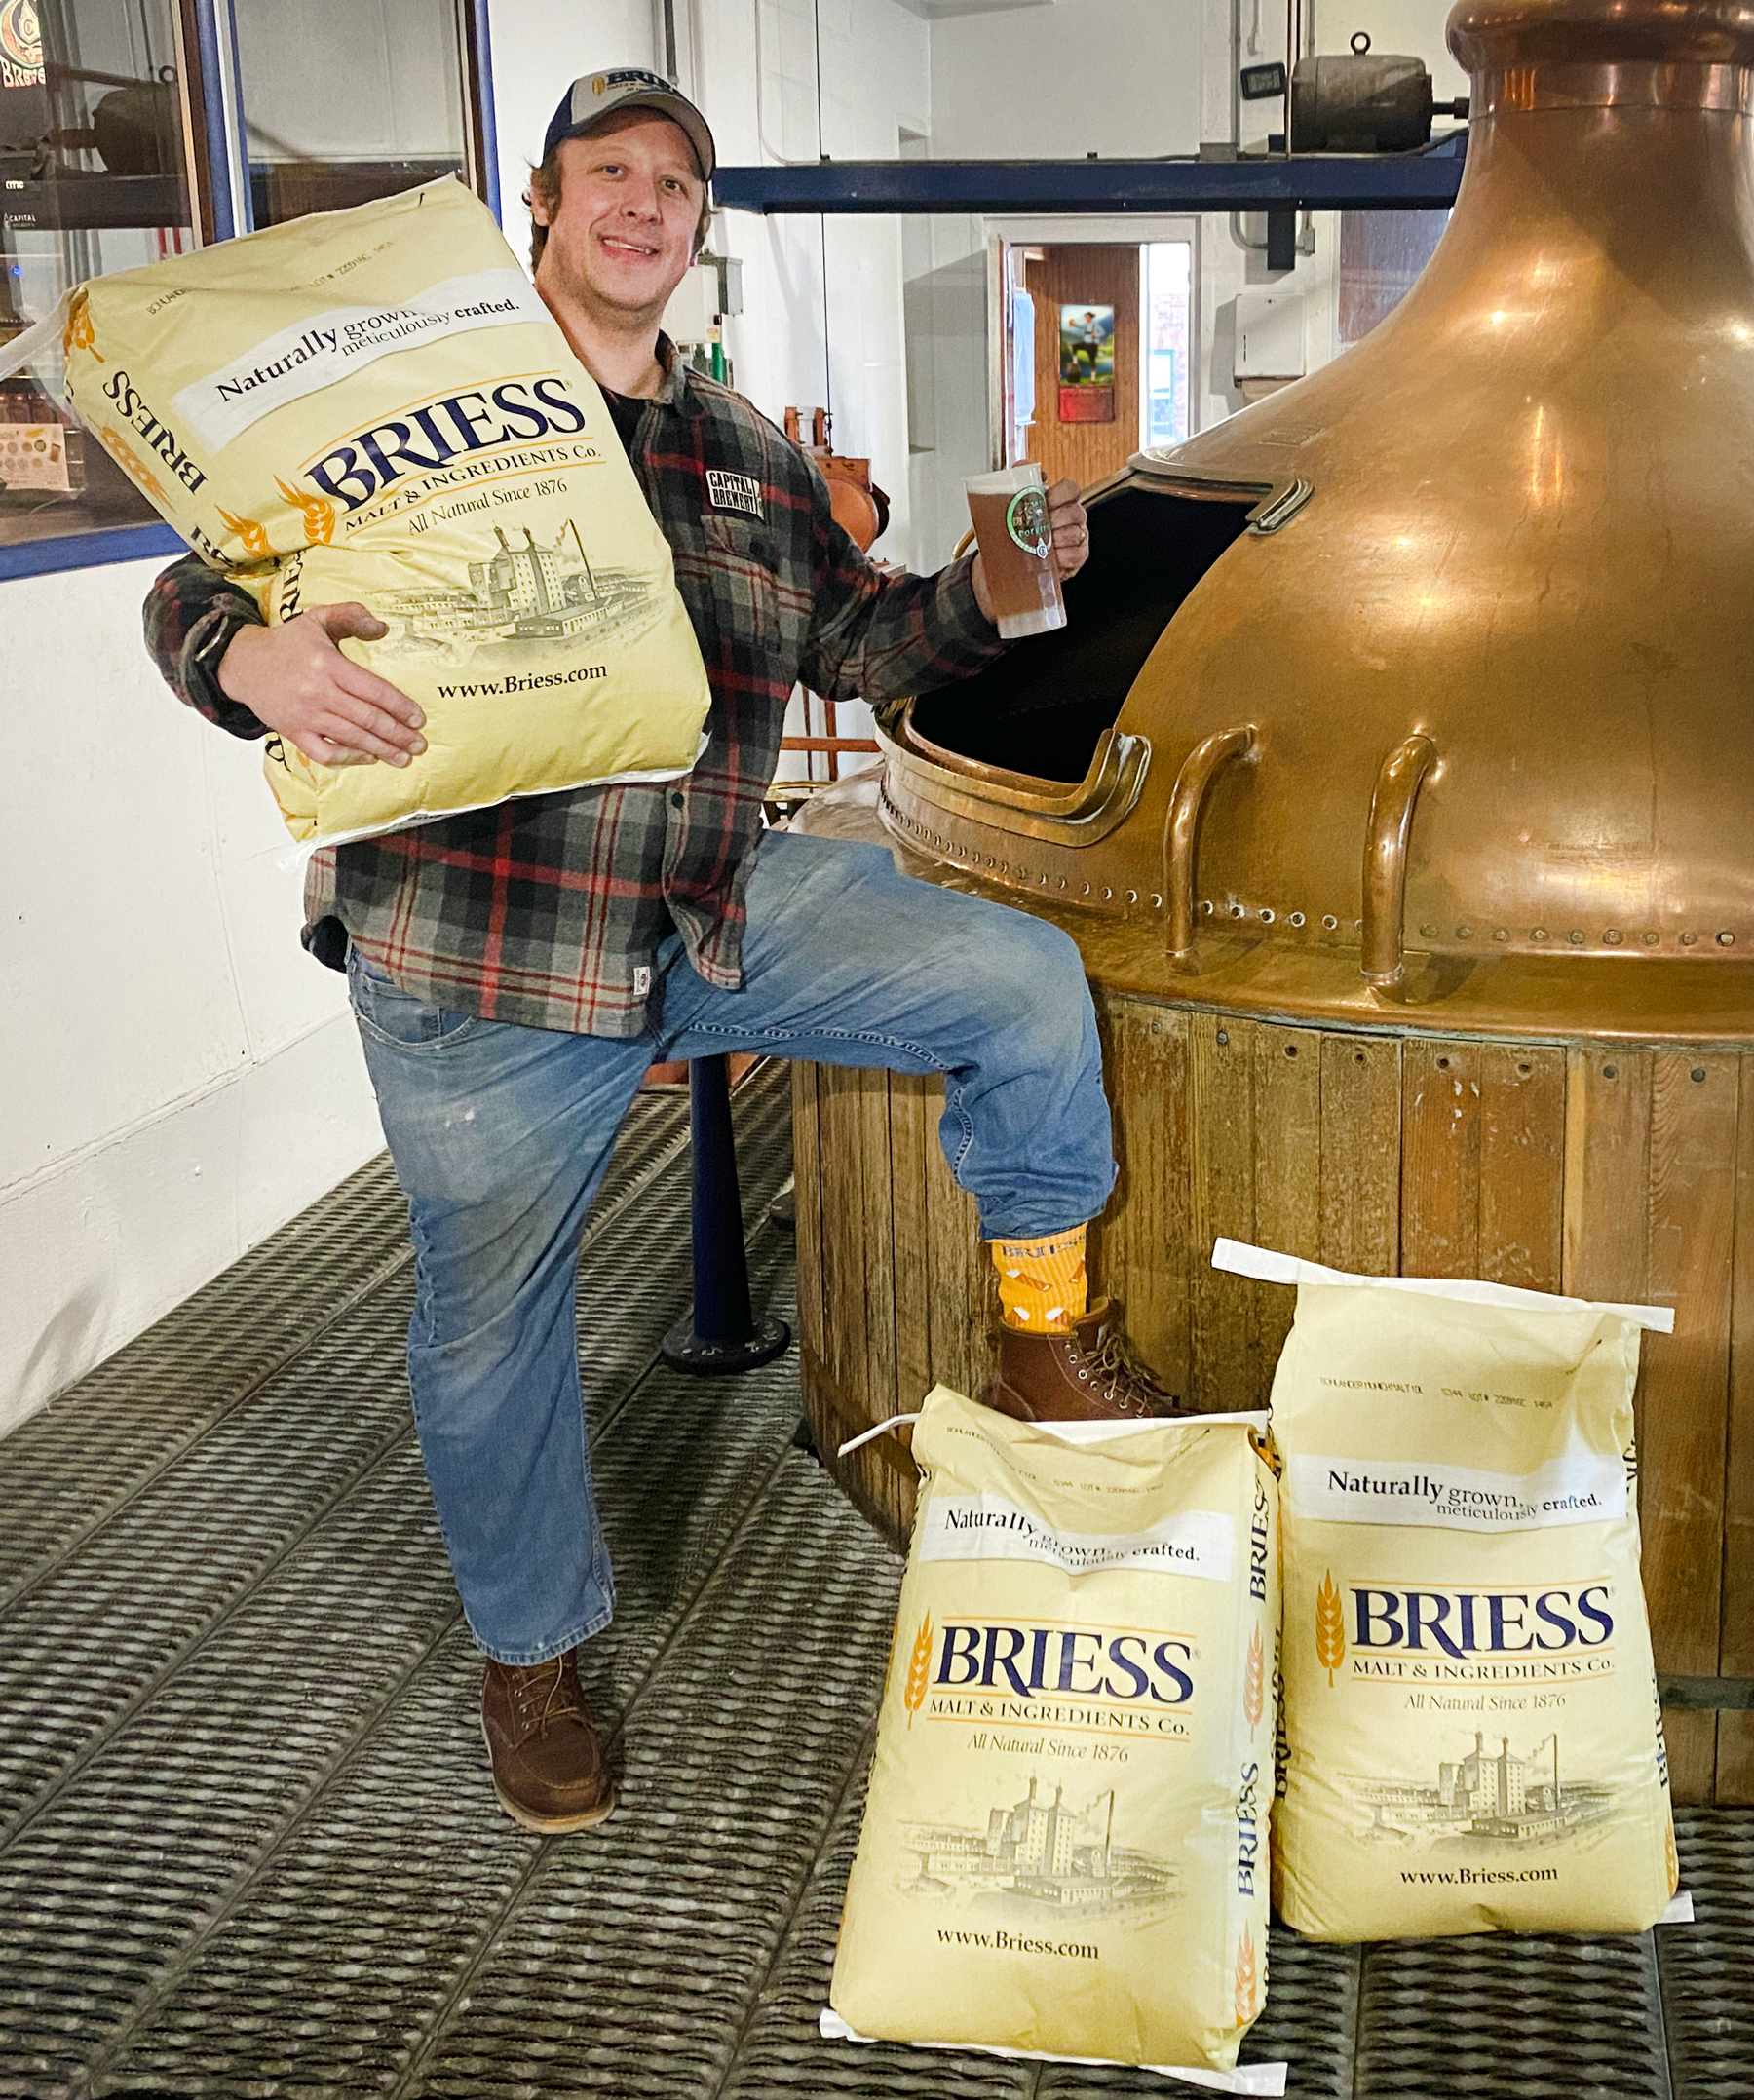 Capital Brewery’s Head Brewer, Tanner Brethorst